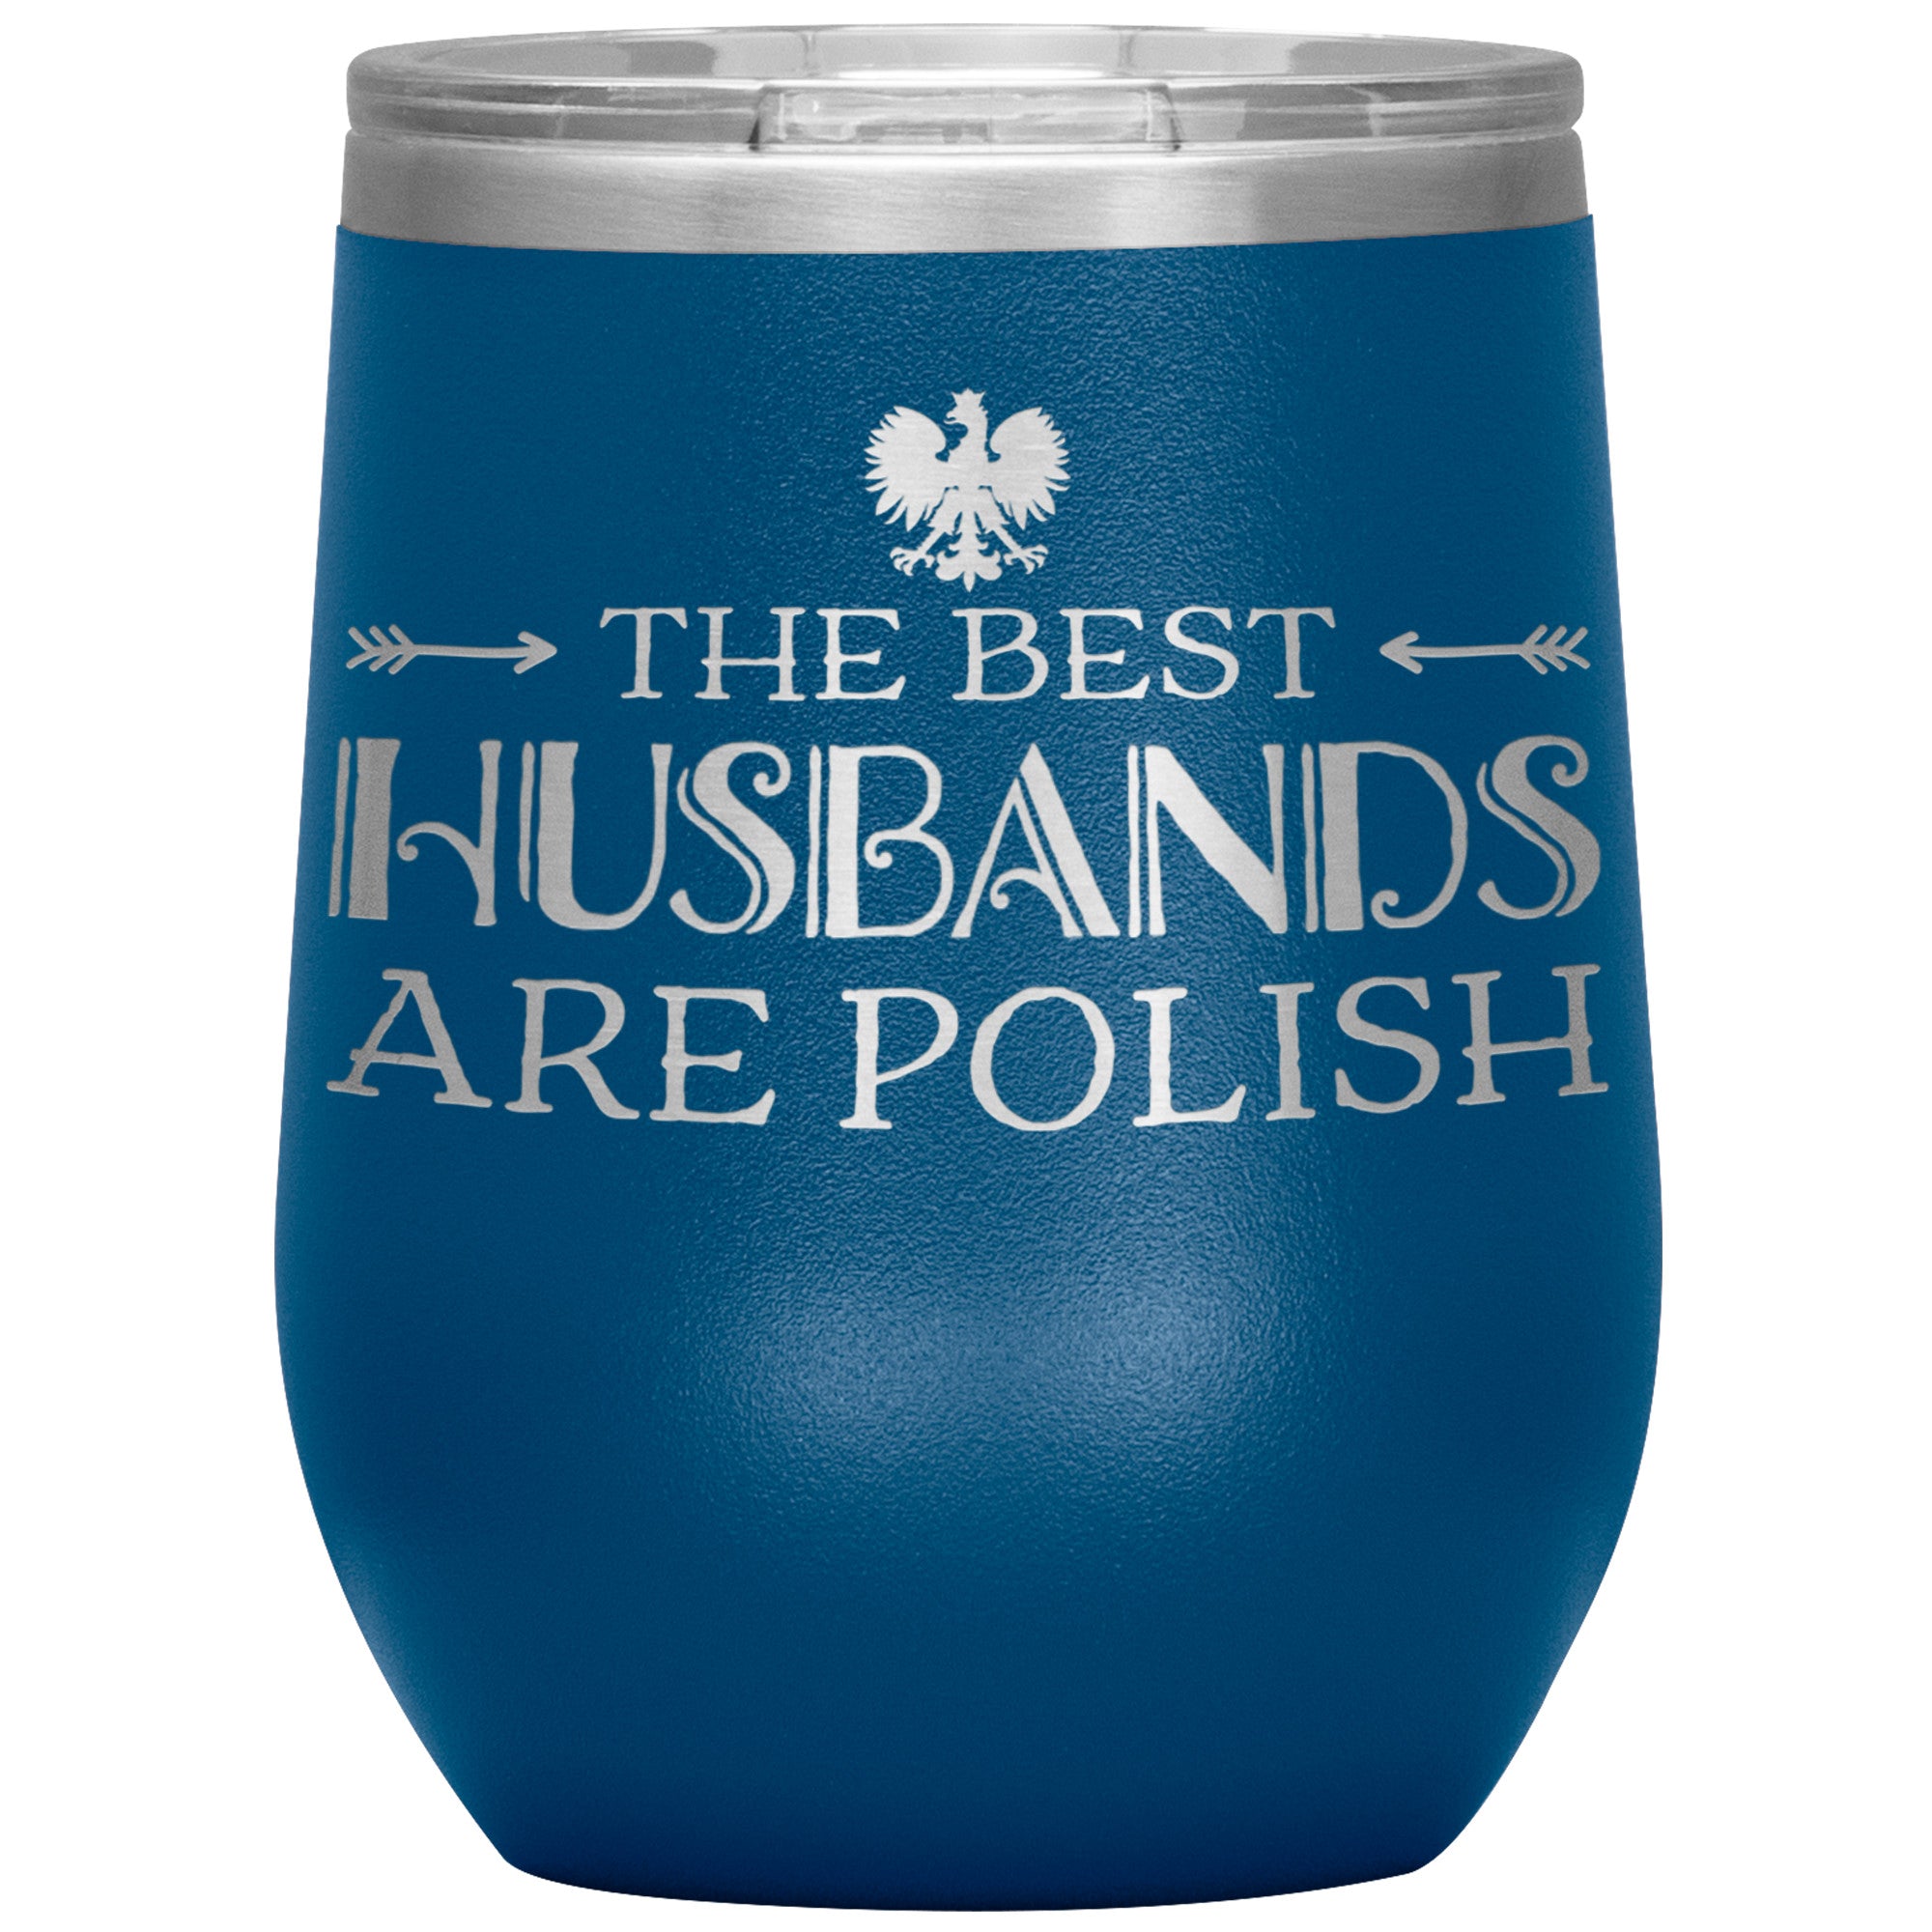 The Best Husbands Are Polish Insulated Wine Tumbler Tumblers teelaunch Blue  